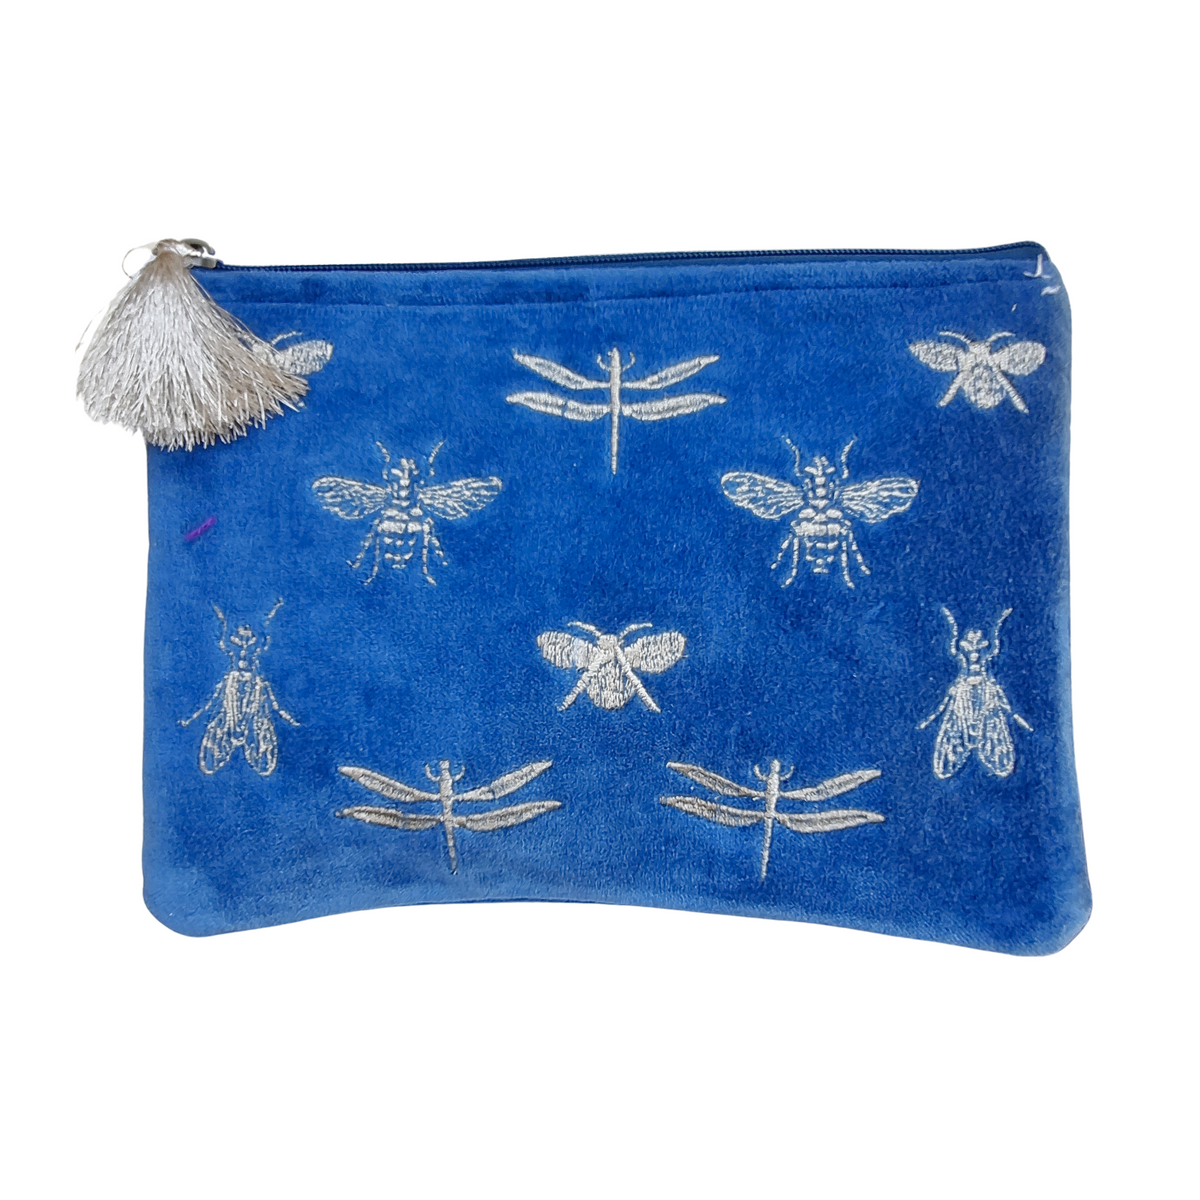 Zoda - Embroidered Velvet Clutch -  Blue Bees